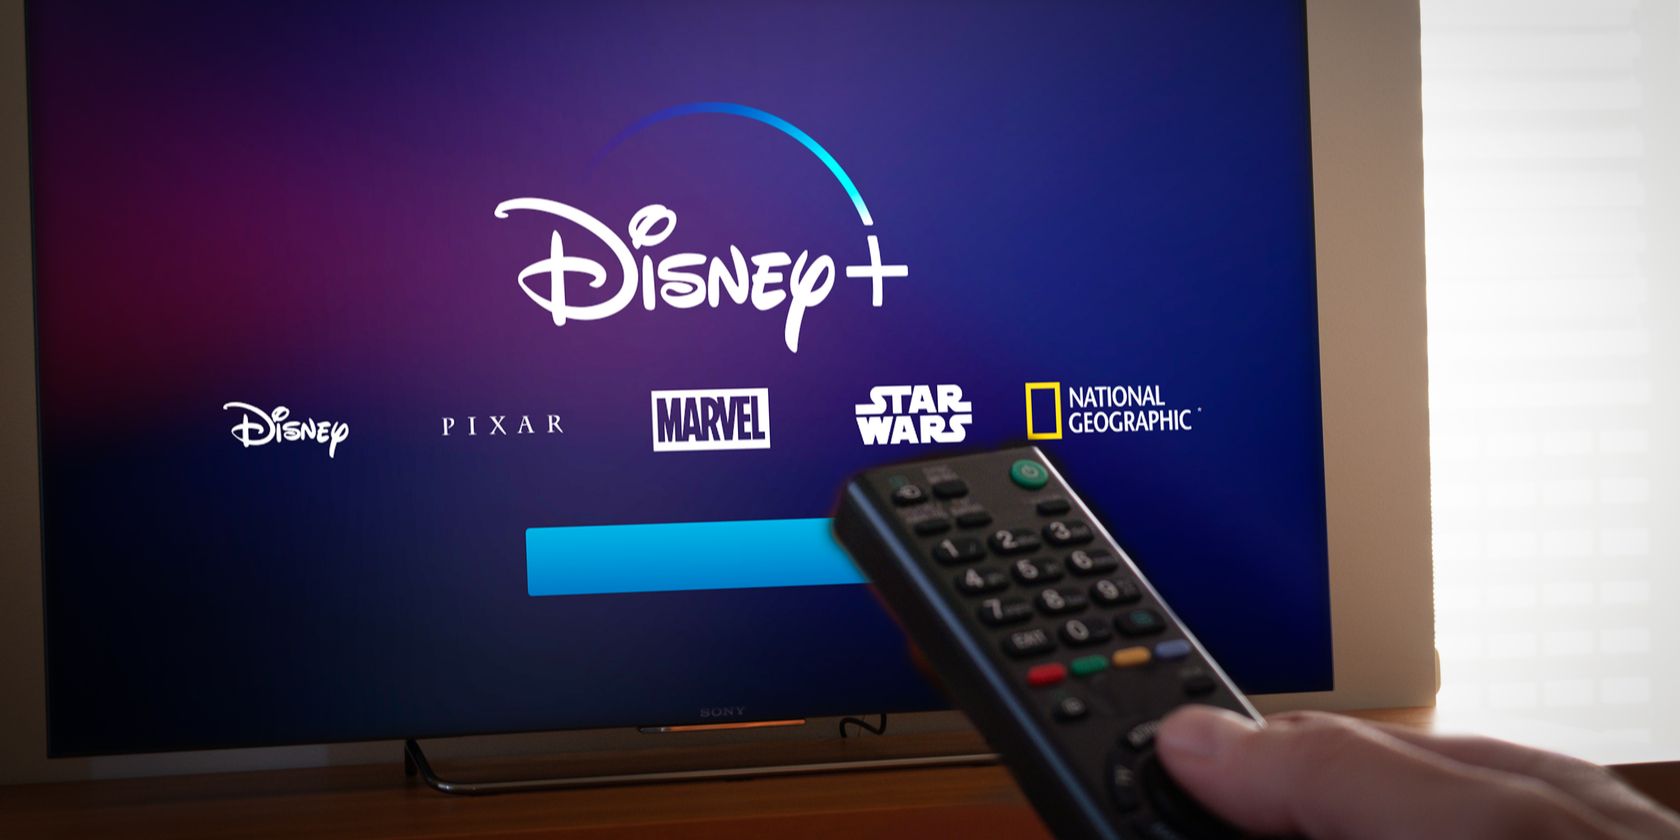 disney+ logo on tv with remote control